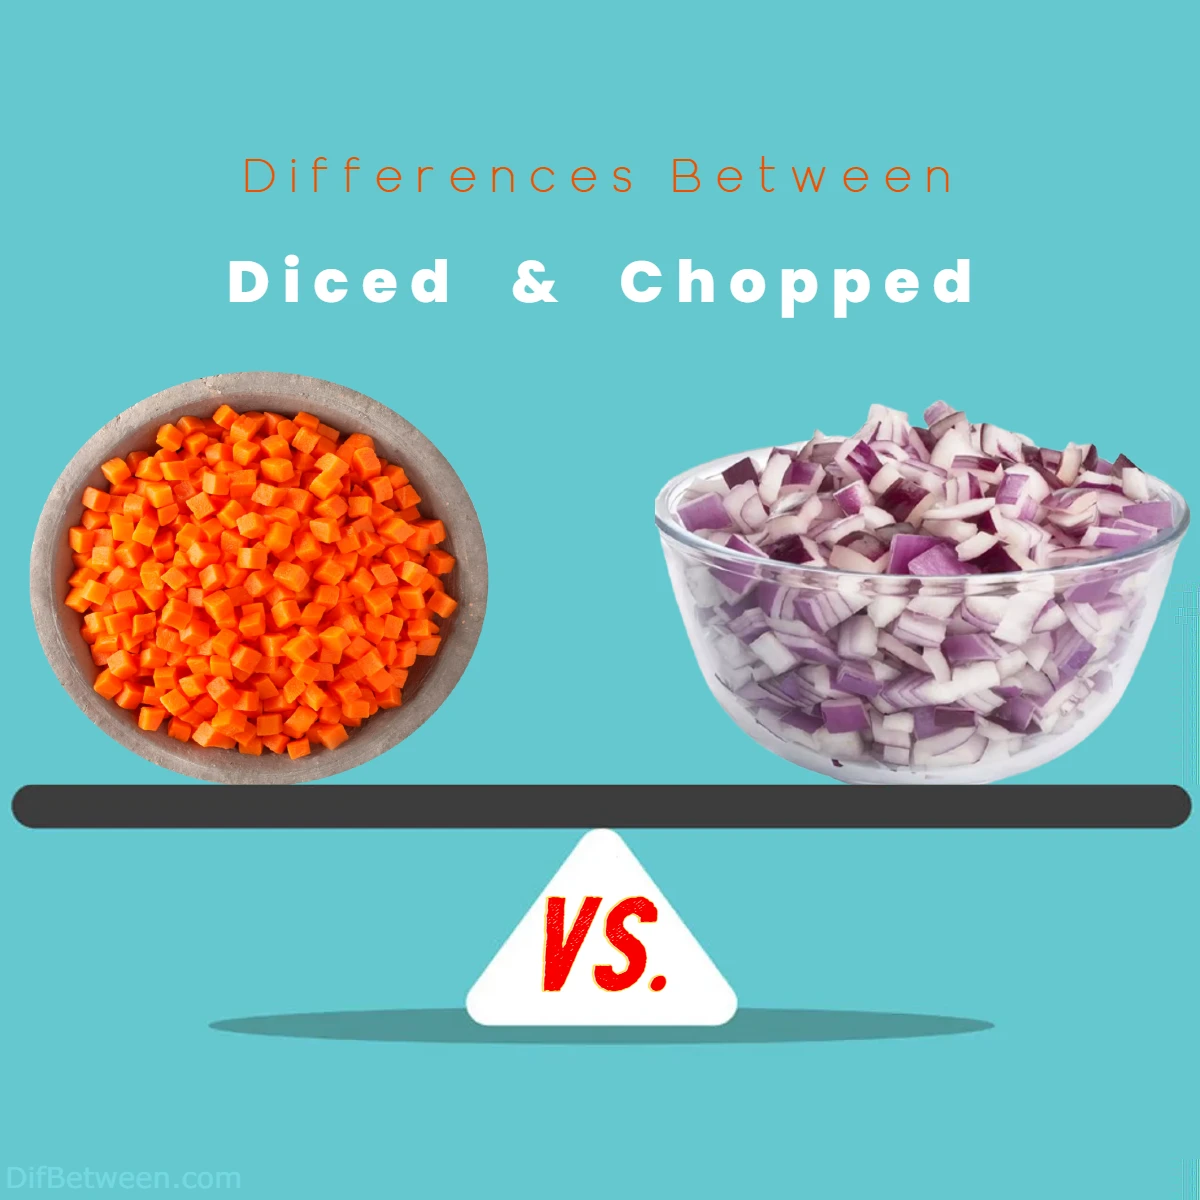 Differences Between Diced vs Chopped